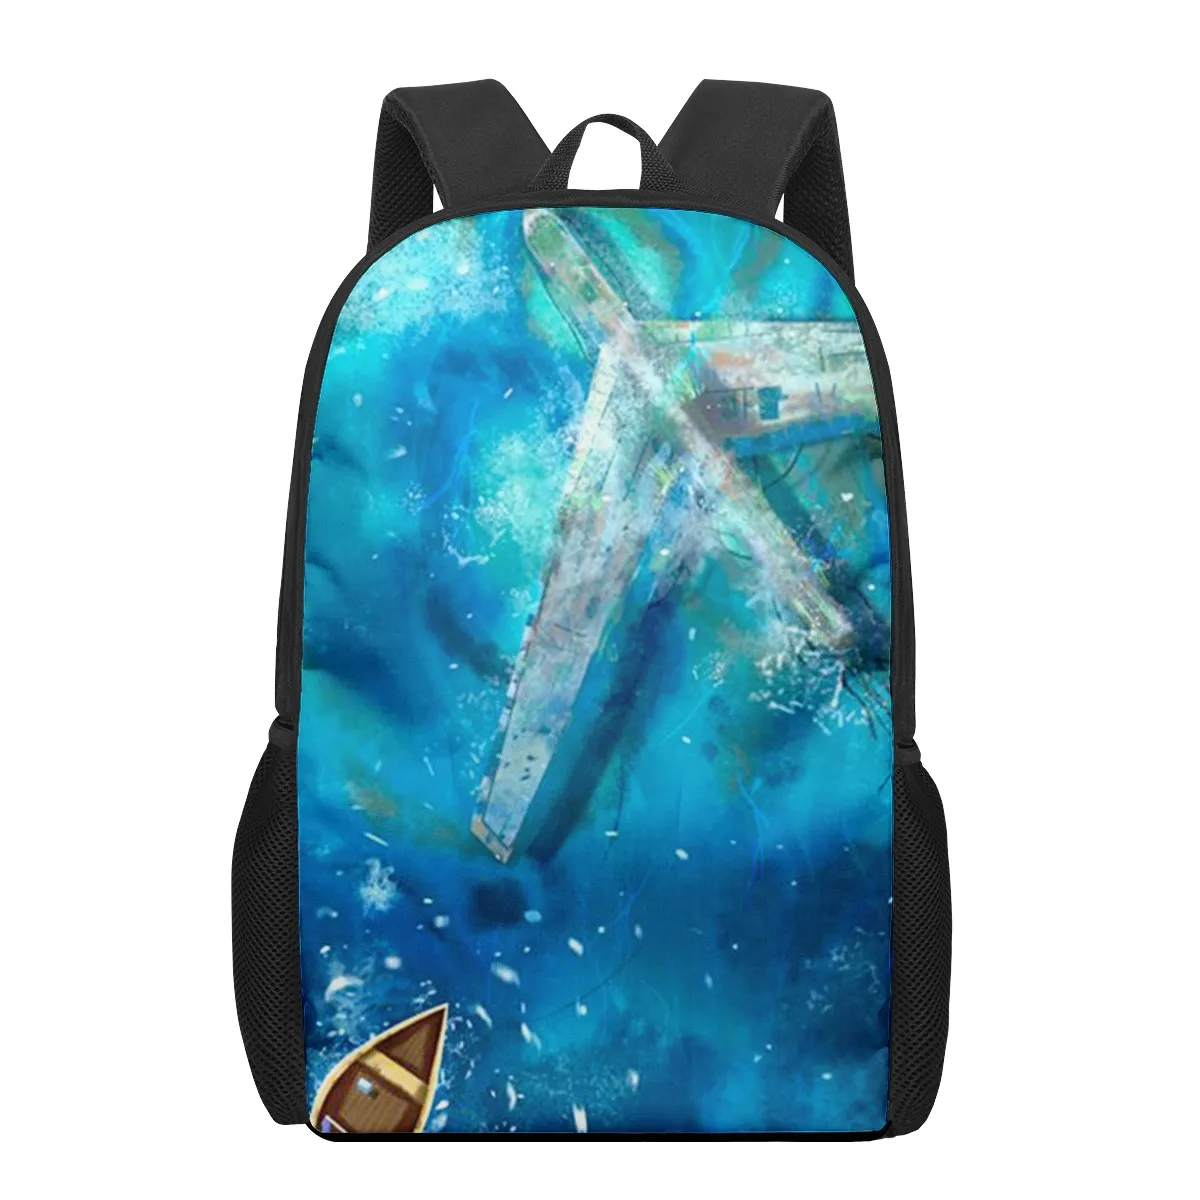 aircraft sky Print School Bags for Boys Girls Primary Students Backpacks Kids Book Bag Satchel Back Pack